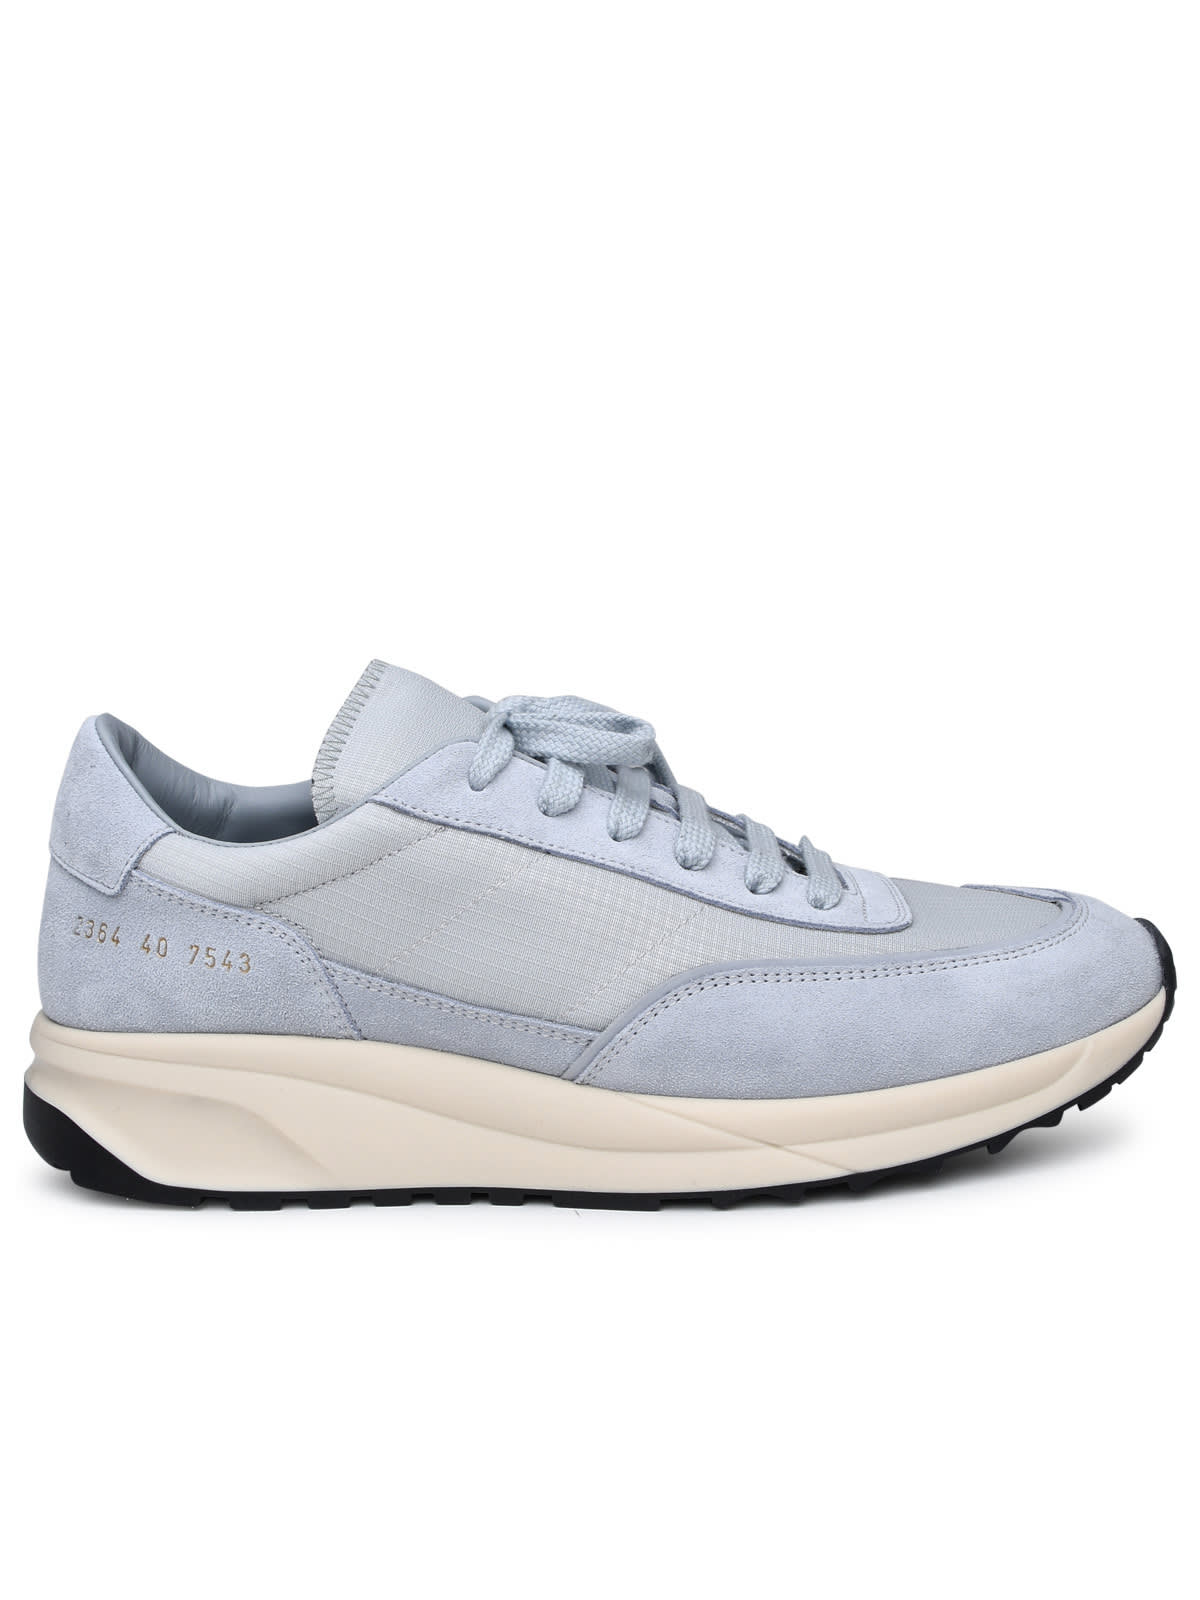 COMMON PROJECTS GRAY SUEDE TRACK SNEAKERS